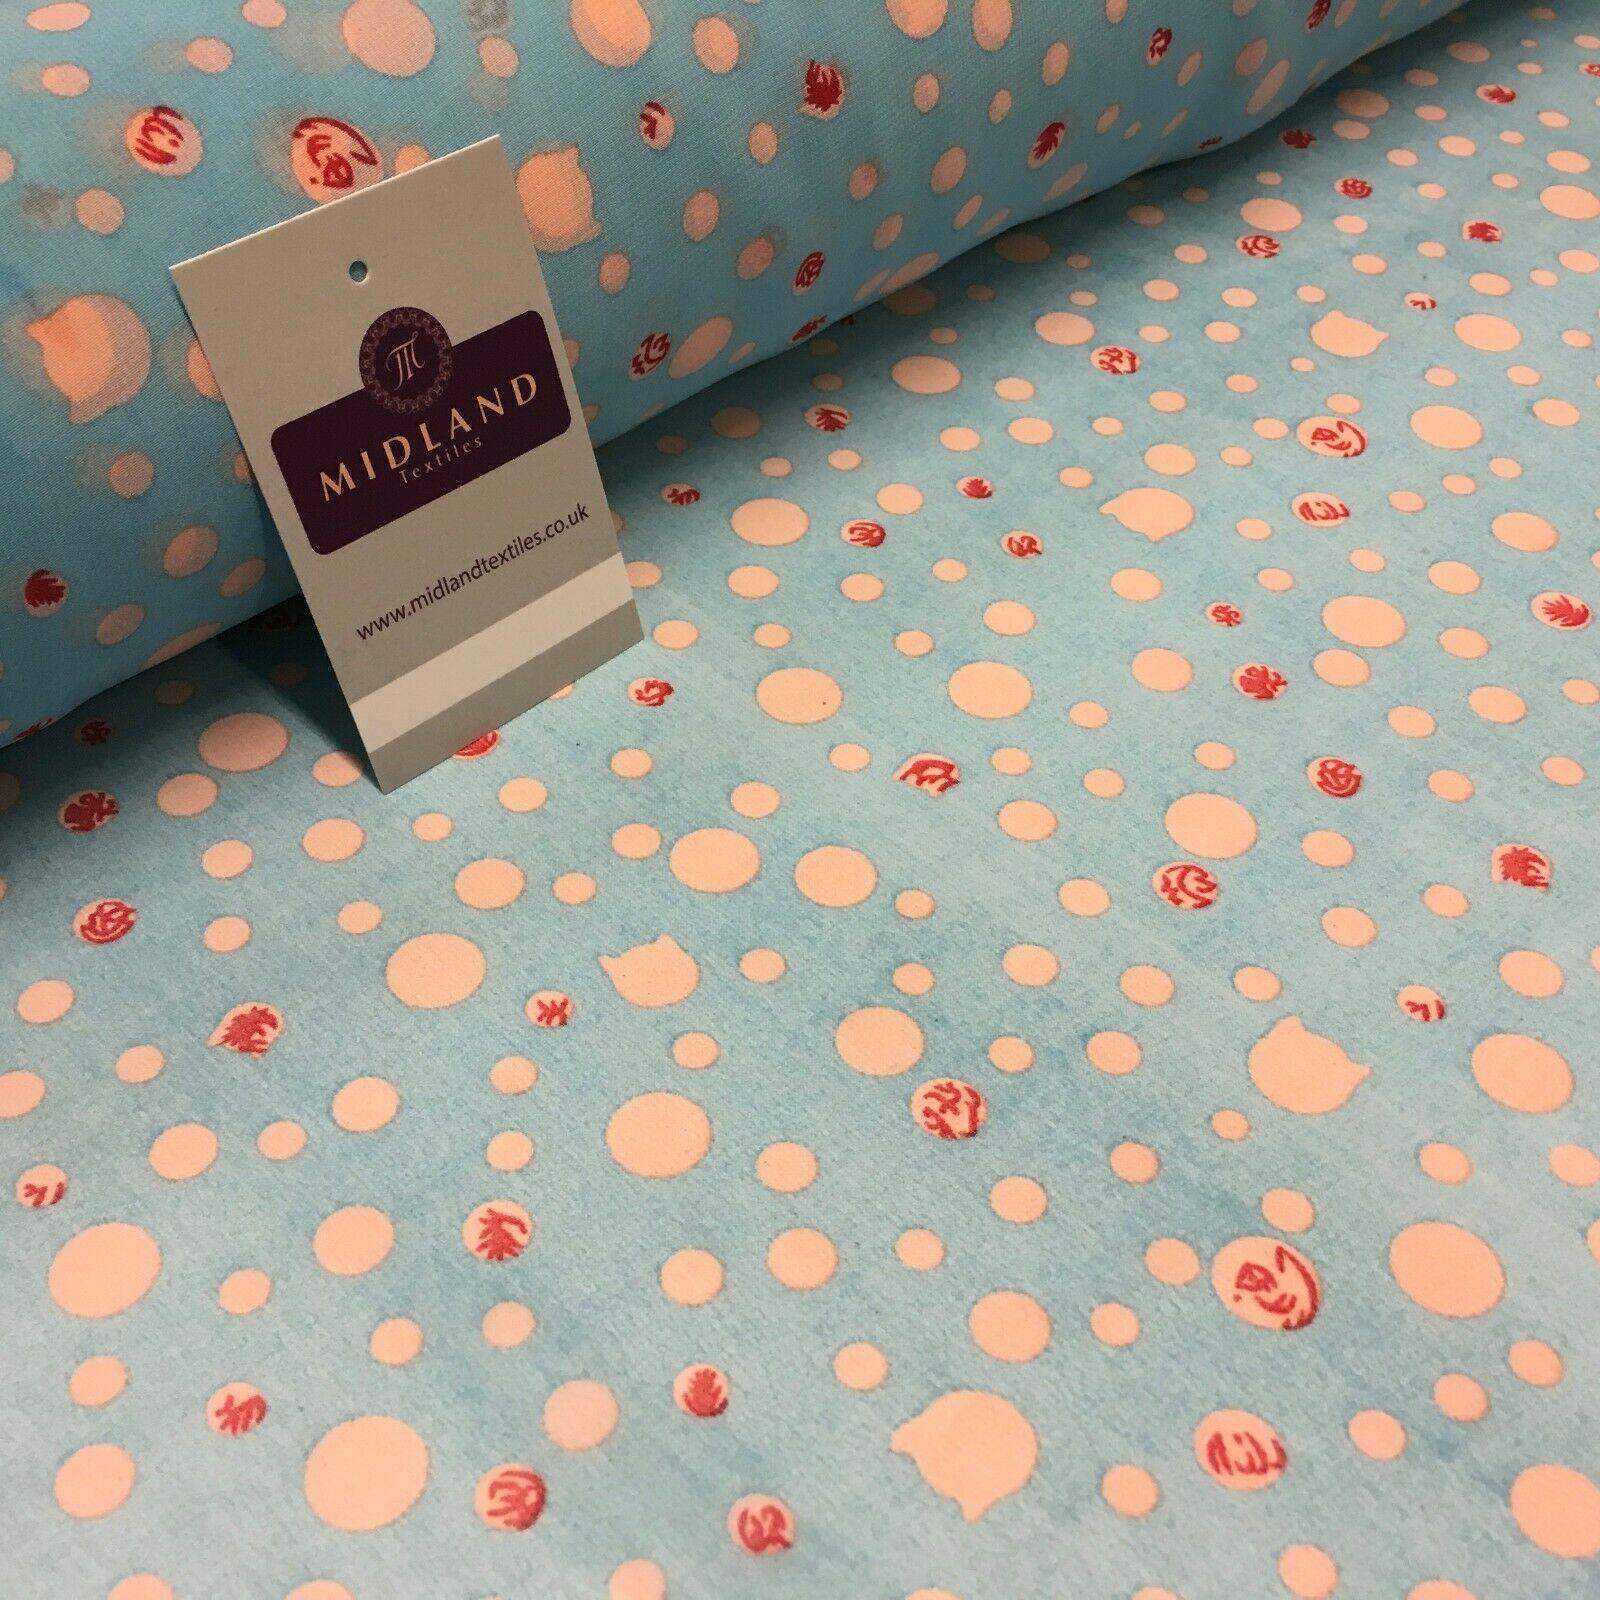 Turquoise Spotted Printed Crepe chiffon Dress Fabric 150 cm Wide MK1190-17 Mtex